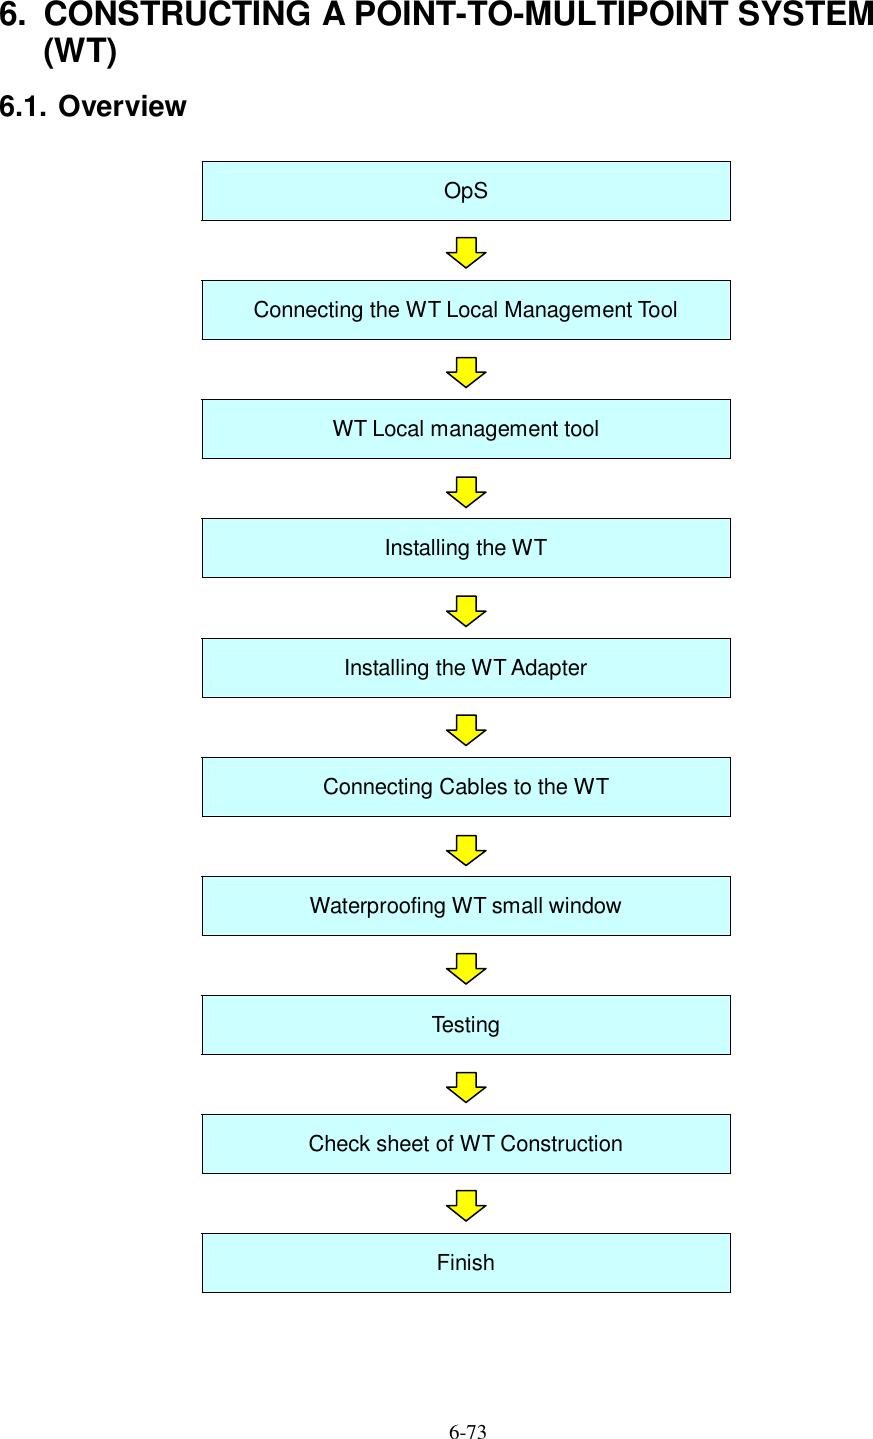   6-73   6.  CONSTRUCTING A POINT-TO-MULTIPOINT SYSTEM (WT) 6.1. Overview  OpS  Connecting the WT Local Management Tool  WT Local management tool  Installing the WT  Installing the WT Adapter  Connecting Cables to the WT  Waterproofing WT small window  Testing  Check sheet of WT Construction  Finish 